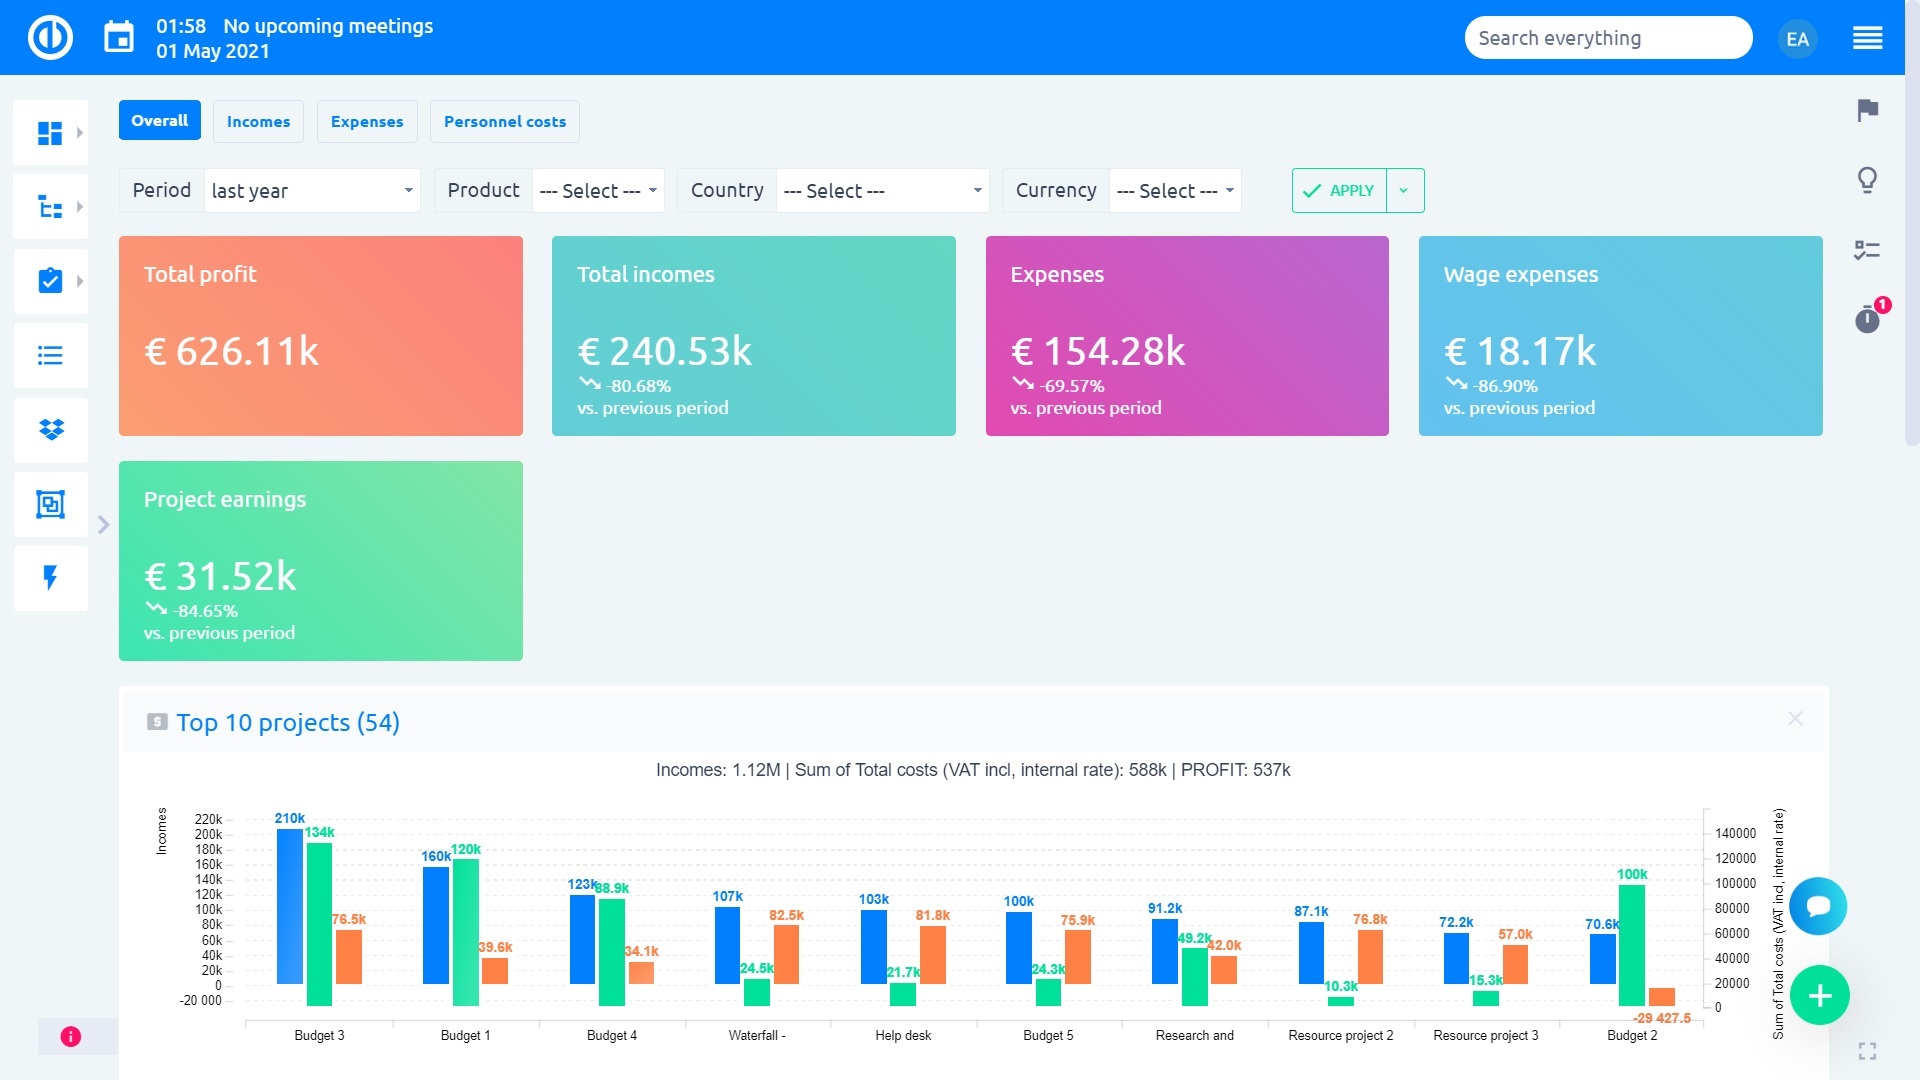 Easy Redmine 2018 - Finance manager dashboard - top projects